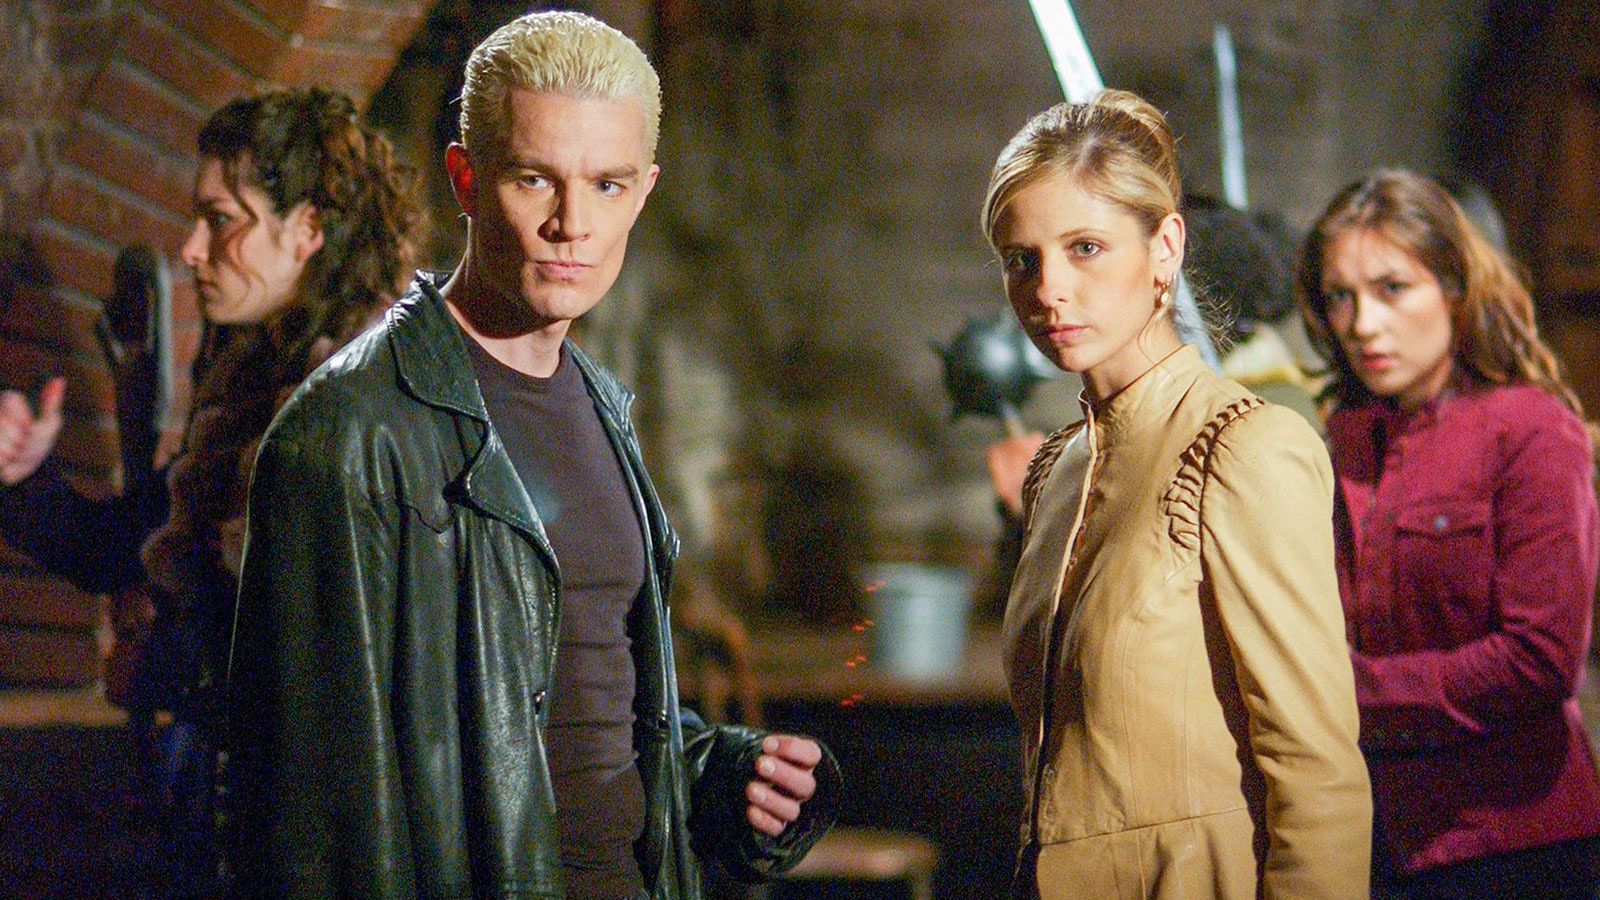 A Buffy The Vampire Slayer Spin-Off Audio Series About Spike Is Coming Soon